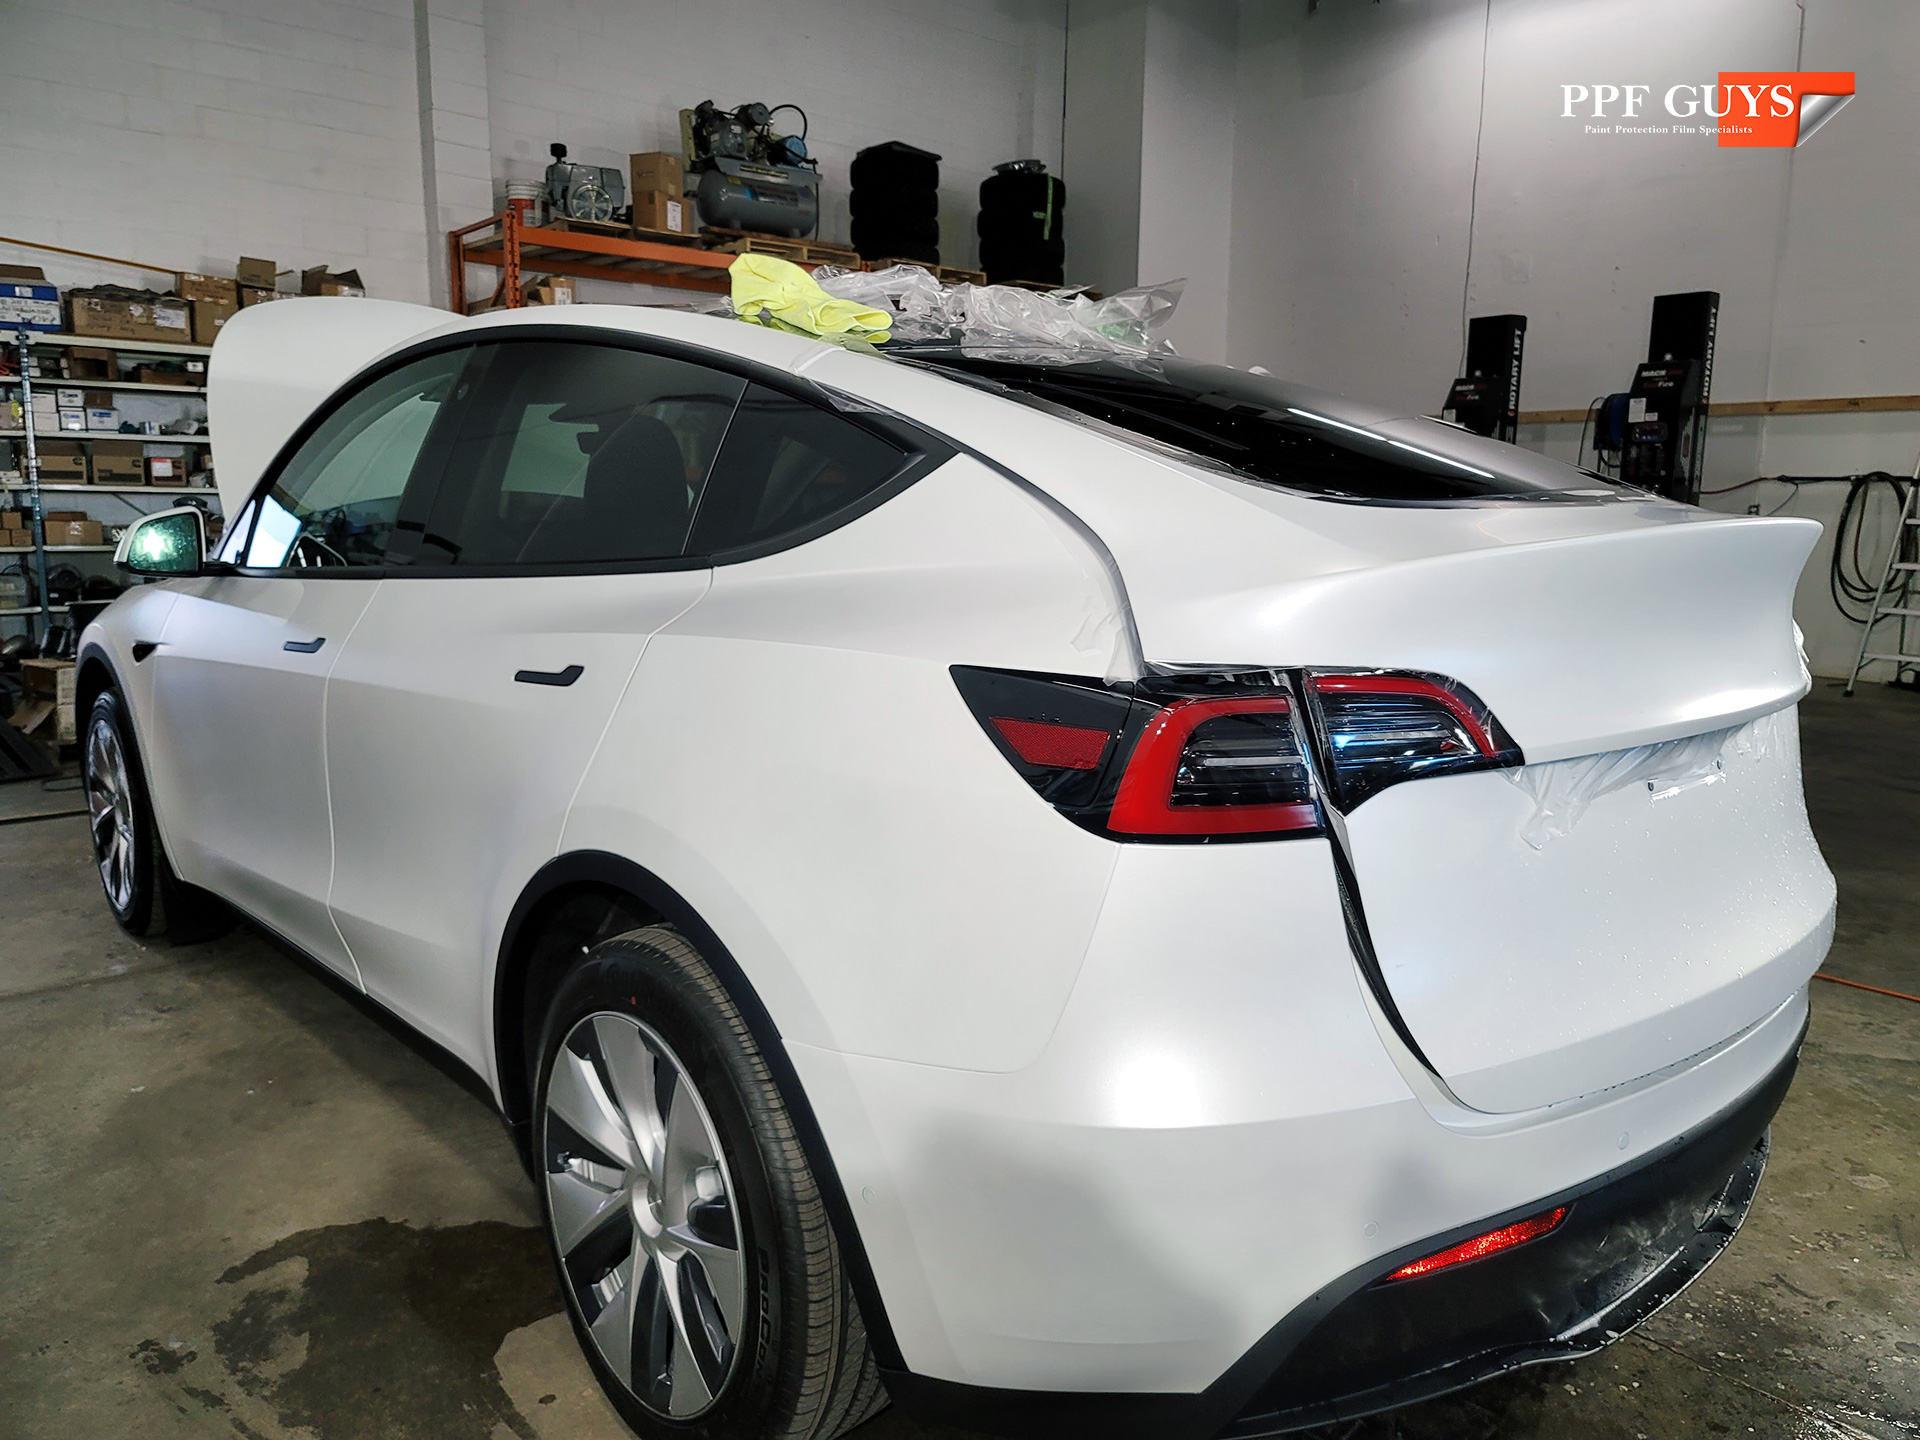 PPF Guys Model Y White Xpel Stealth, ceramic, painted emblems (27).jpg